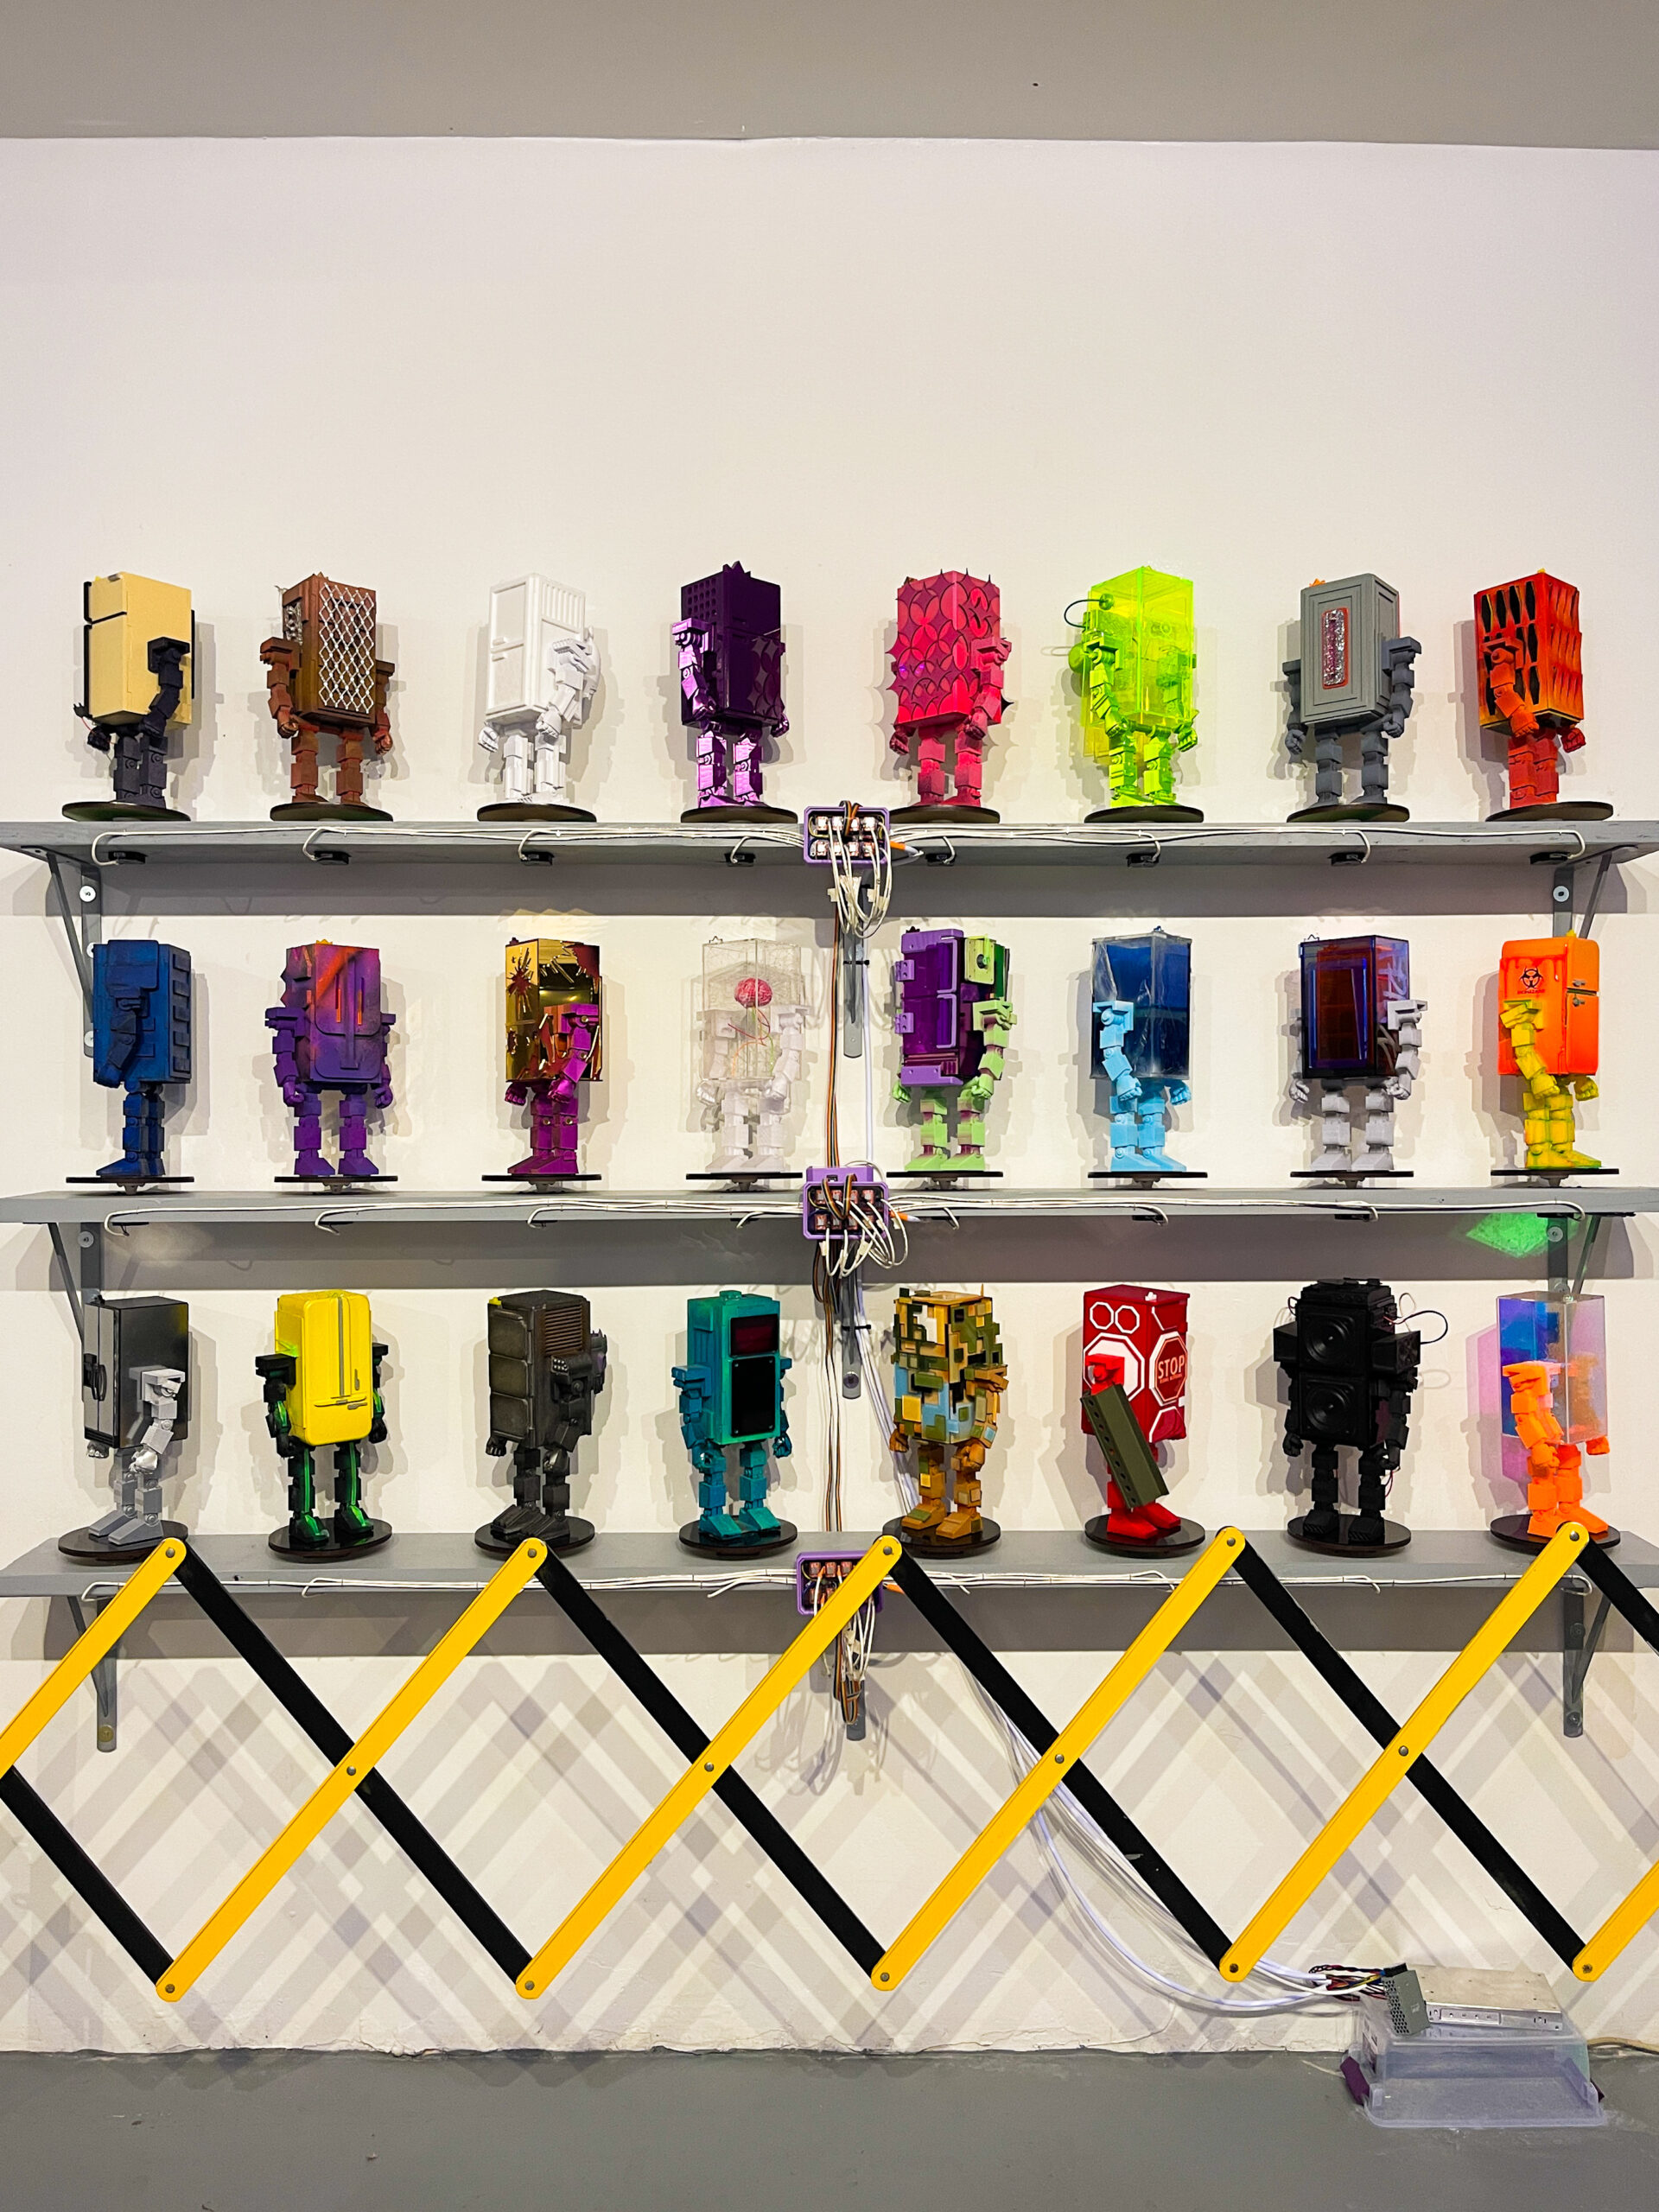 24 robot sculptures mounted on shelves in rows of 8.